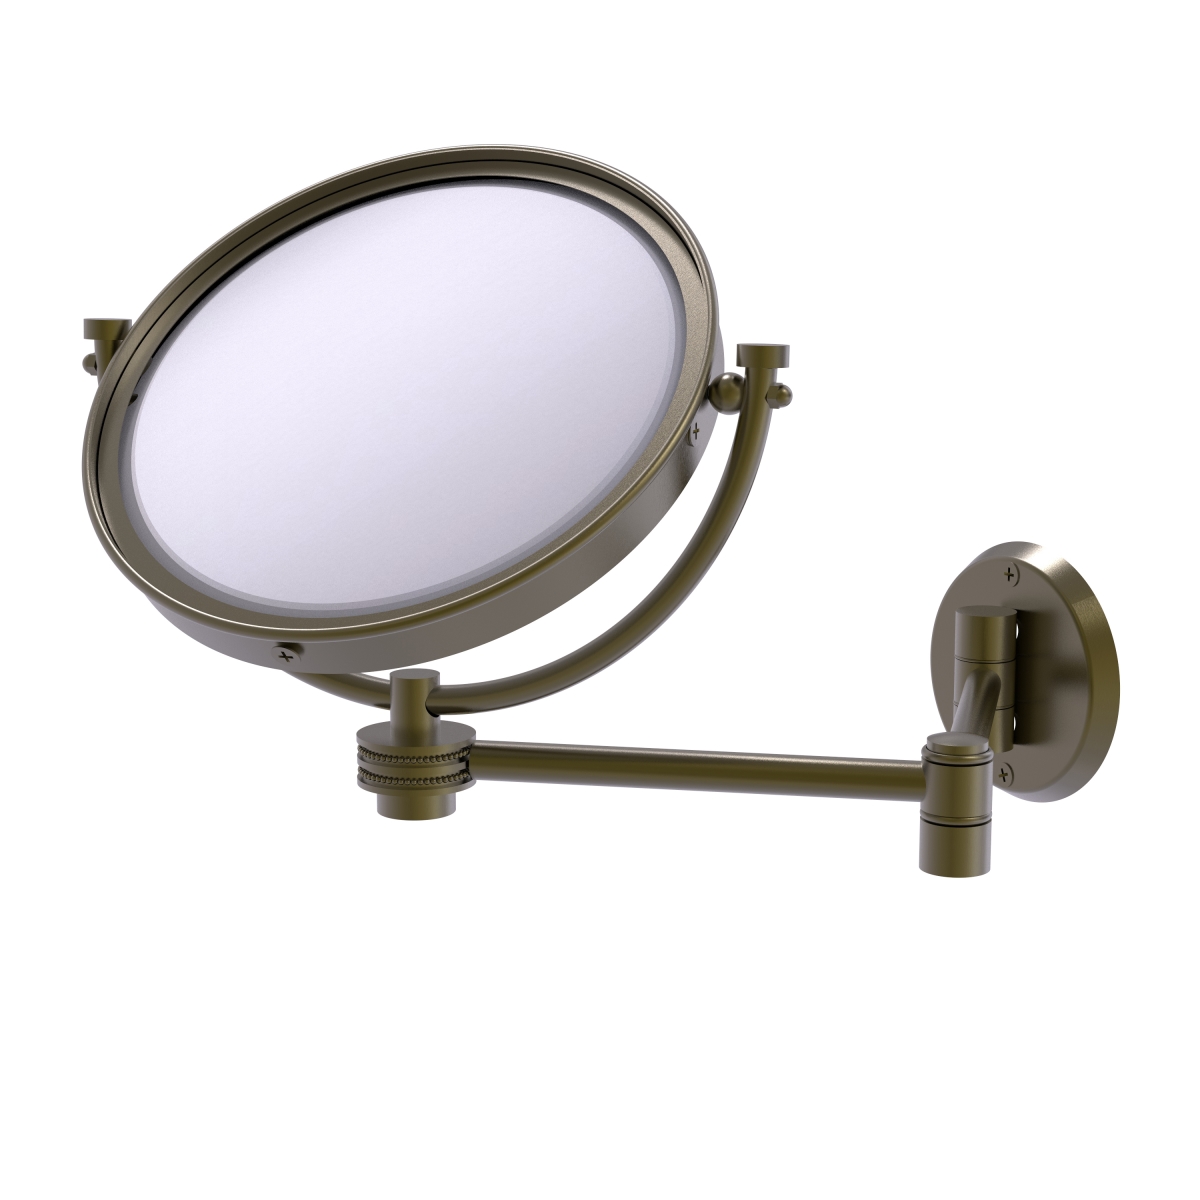 WM-6D-4X-ABR 8 in. Wall Mounted Extending Make-Up Mirror 4X Magnification with Dotted Accent, Antique Brass -  Allied Brass, WM-6D/4X-ABR